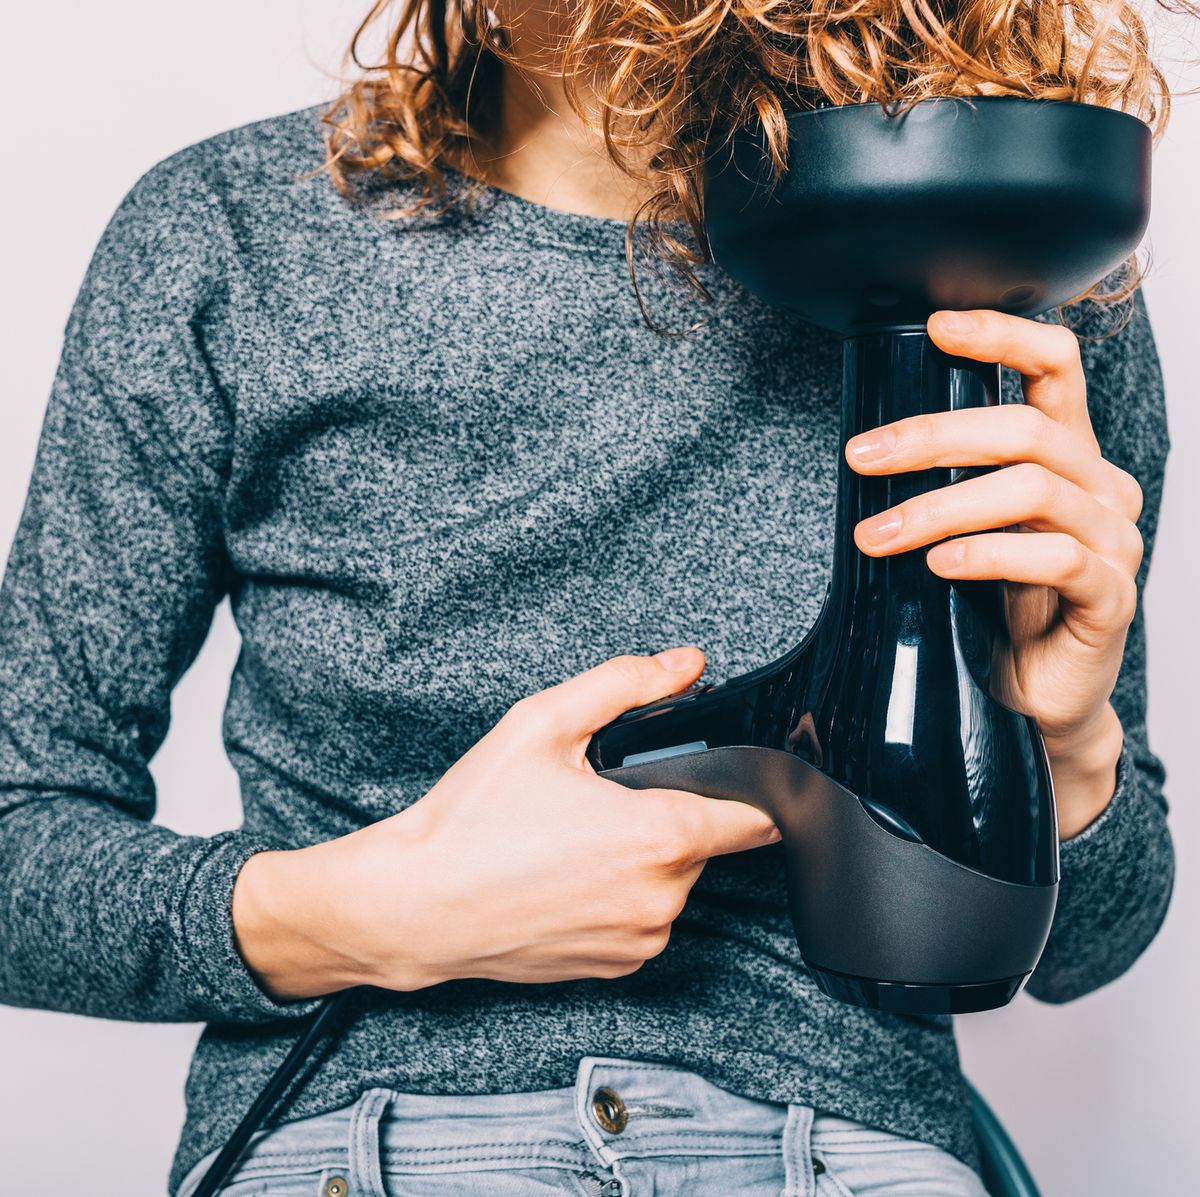 How to Use a Hair Diffuser on Curls and Waves